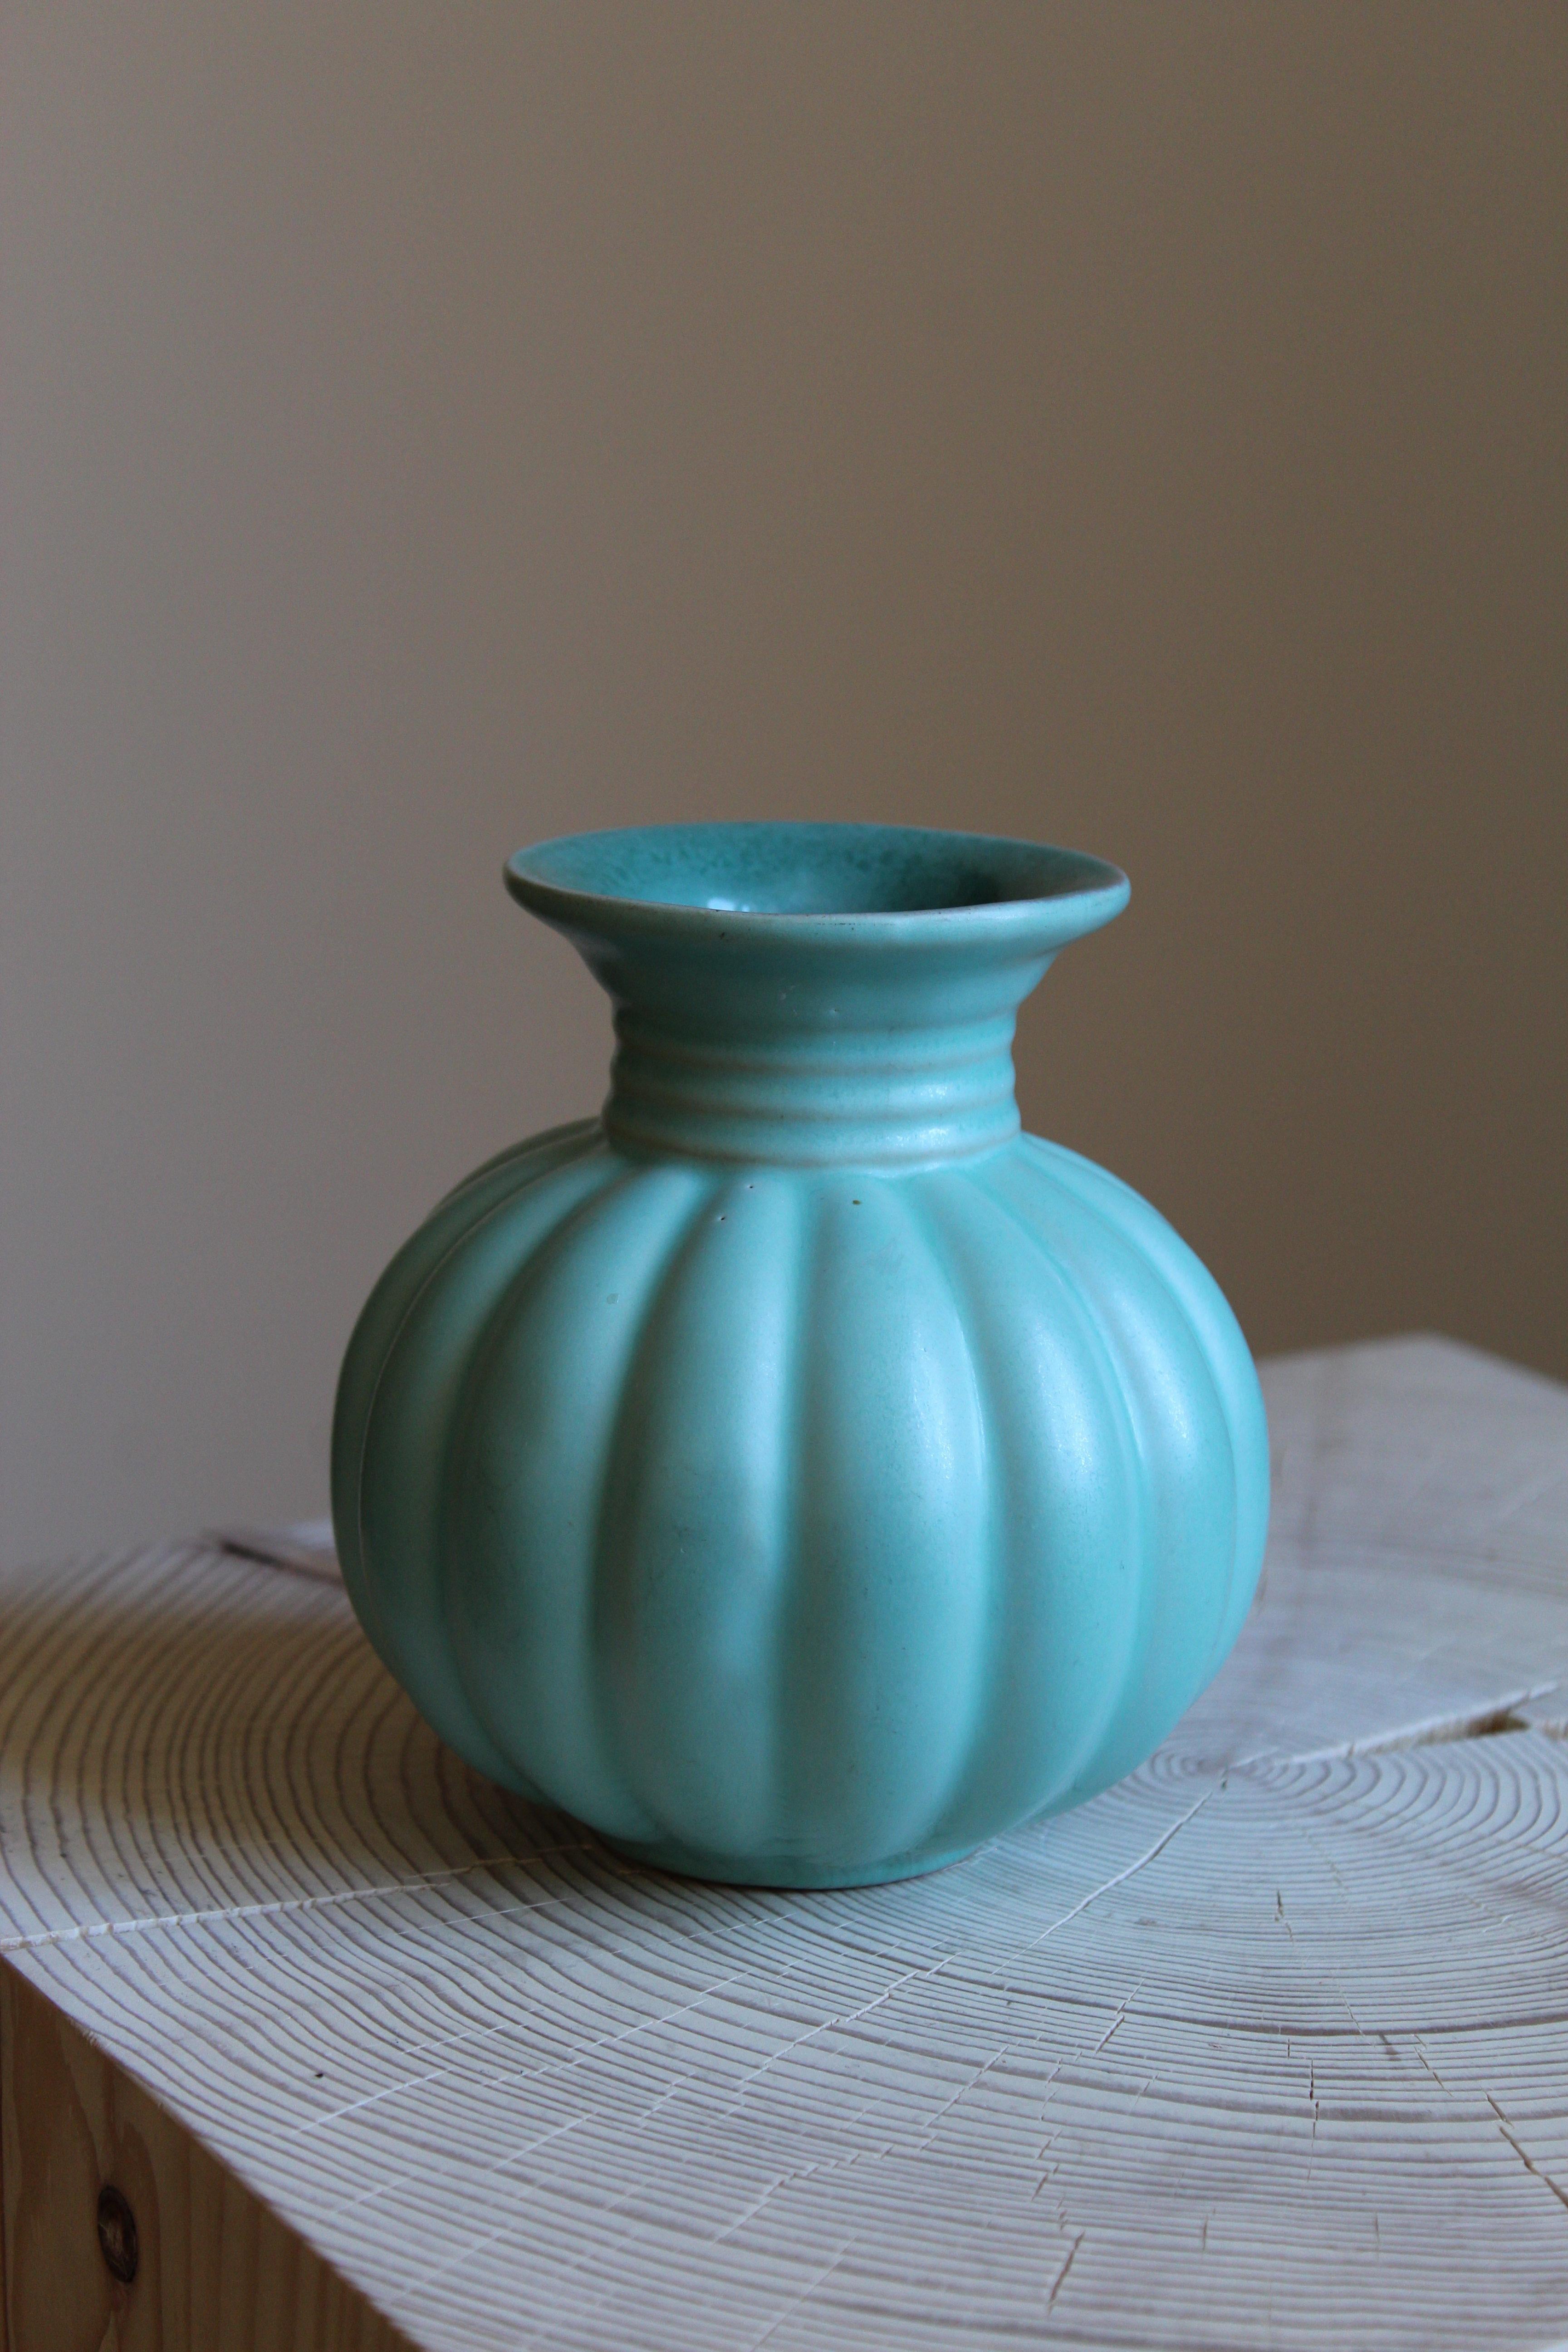 A small early modernist vase. Produced by Upsala-Ekeby, Sweden, 1940s. 

Other designers of the period include Ettore Sottsass, Carl Harry Stålhane, Lisa Larsson, Axel Salto, and Arne Bang.